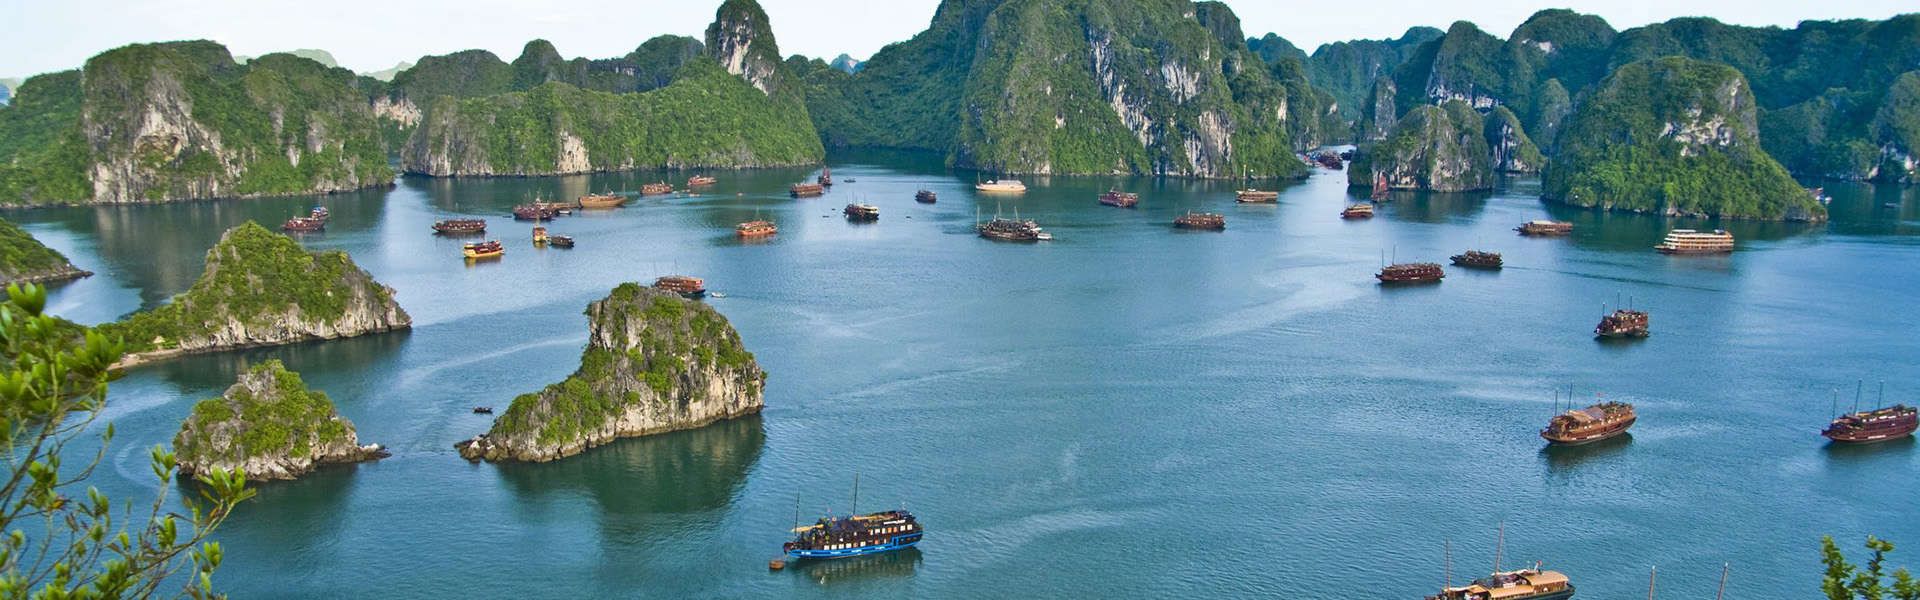 vietnam tours and vacation packages by viet vision travel